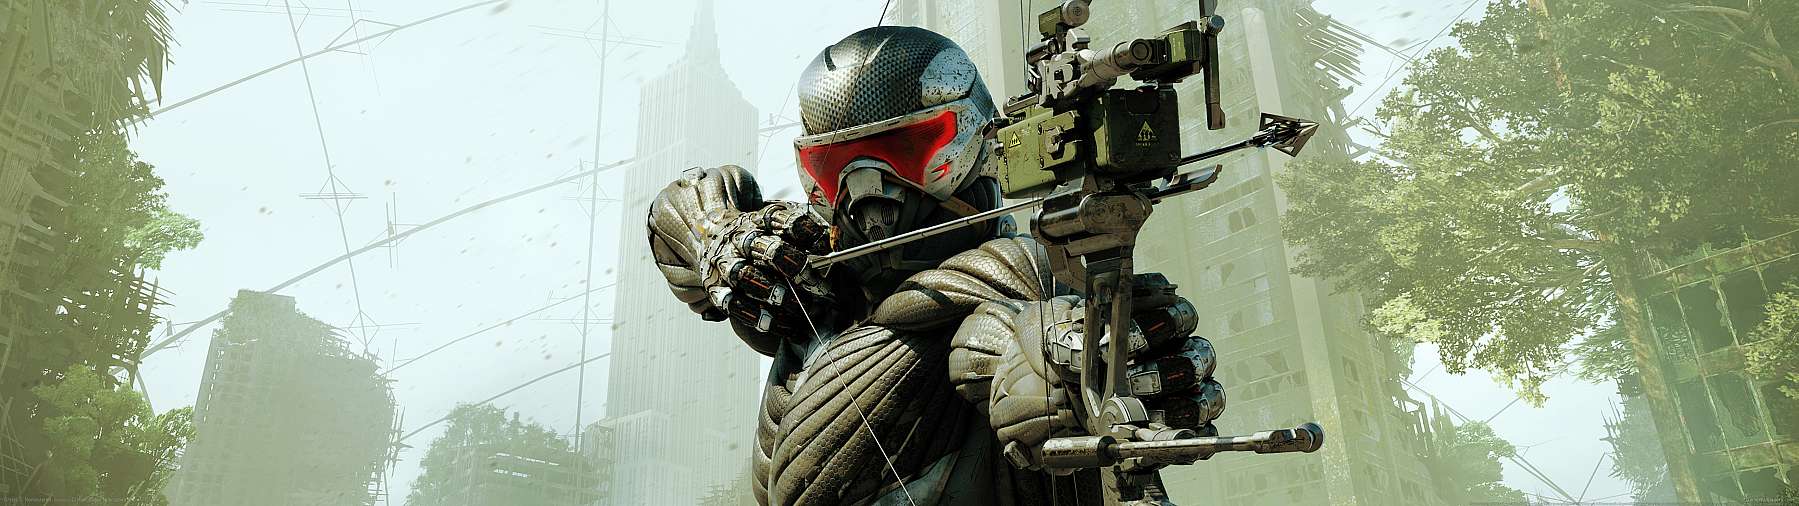 Crysis 3: Remastered superwide fond d'cran 01